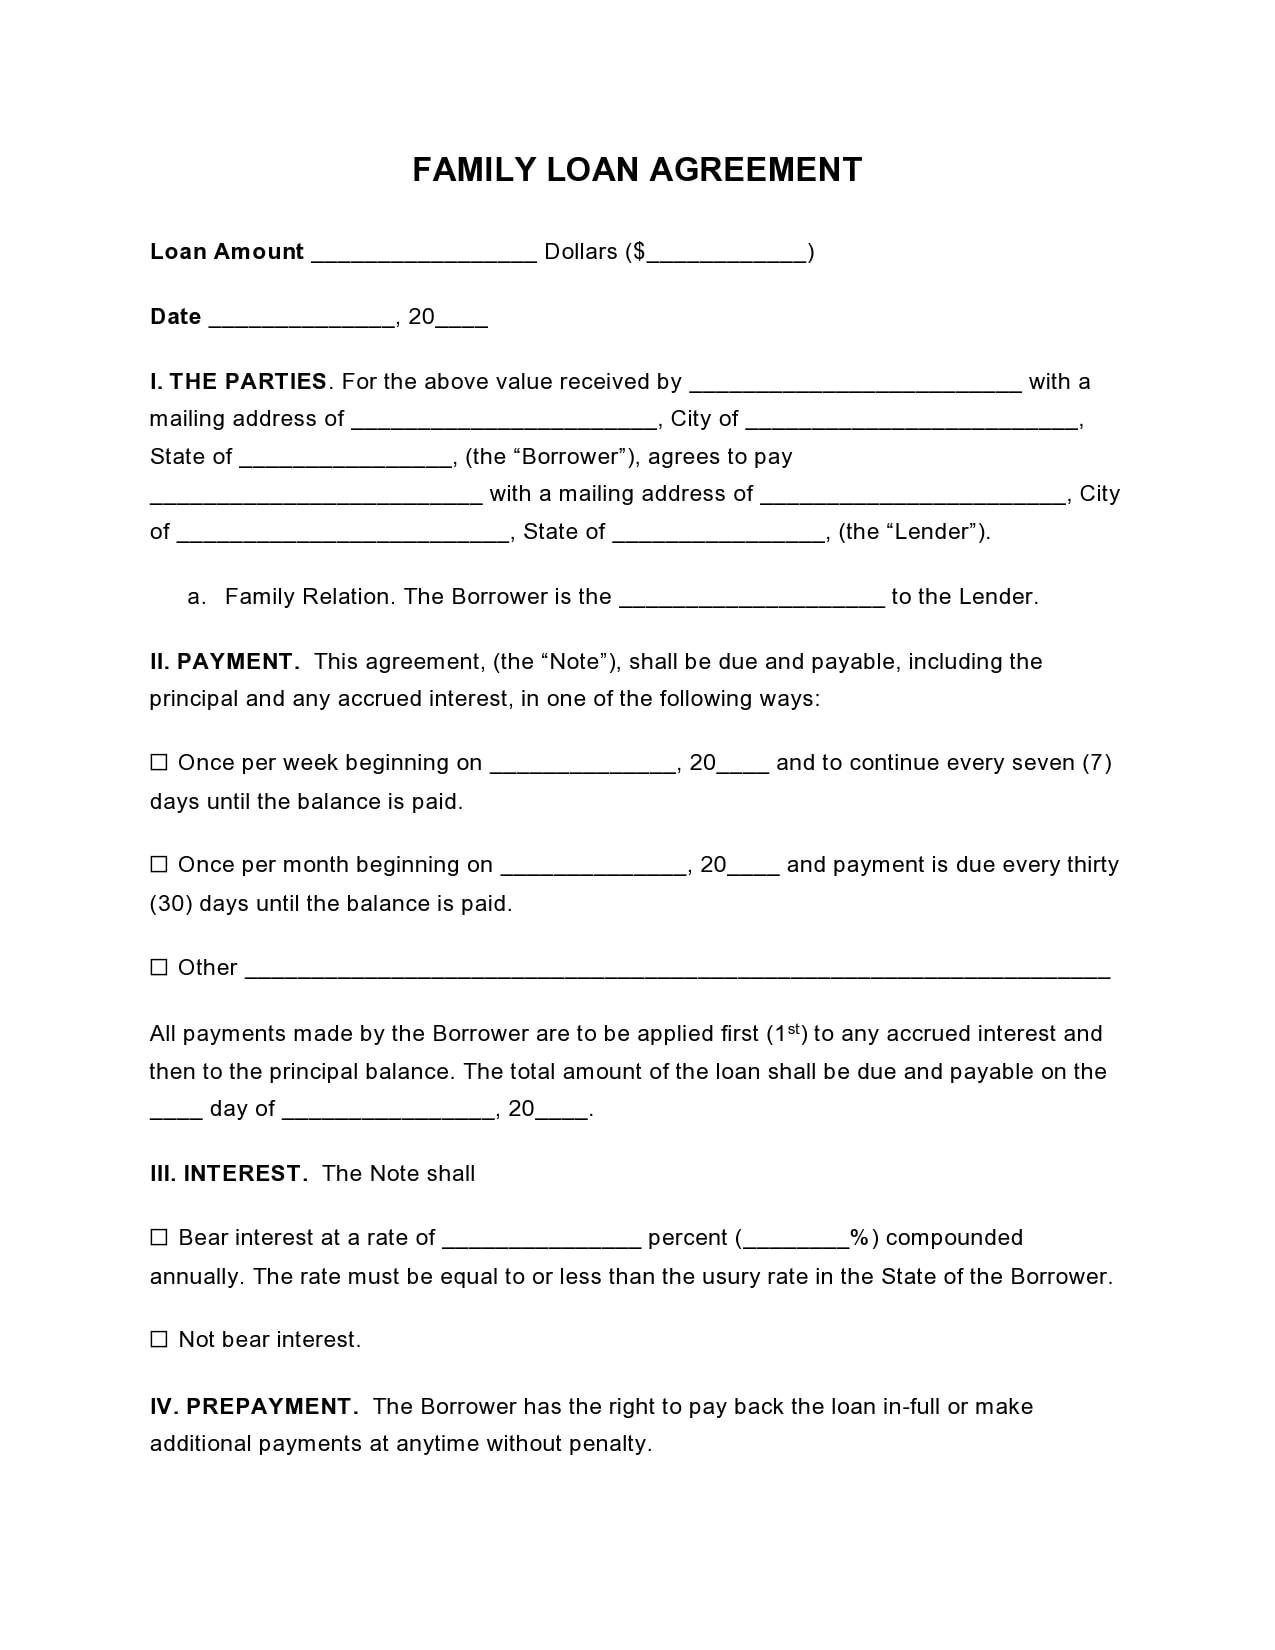 23 Simple Family Loan Agreement Templates (23% Free) Pertaining To cosigner loan agreement template